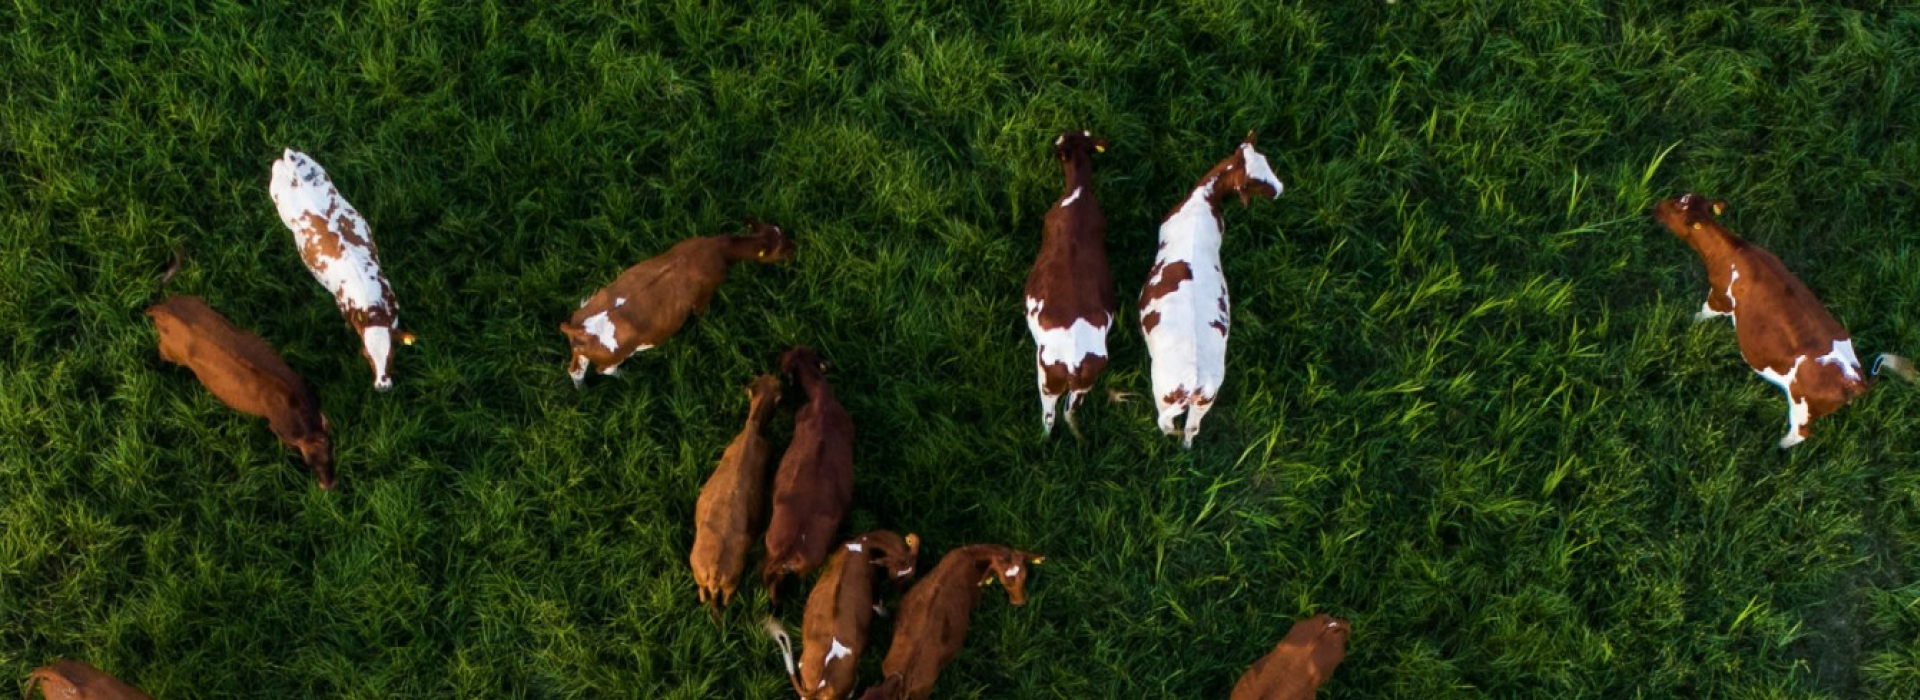 Overhead view of cows grazing